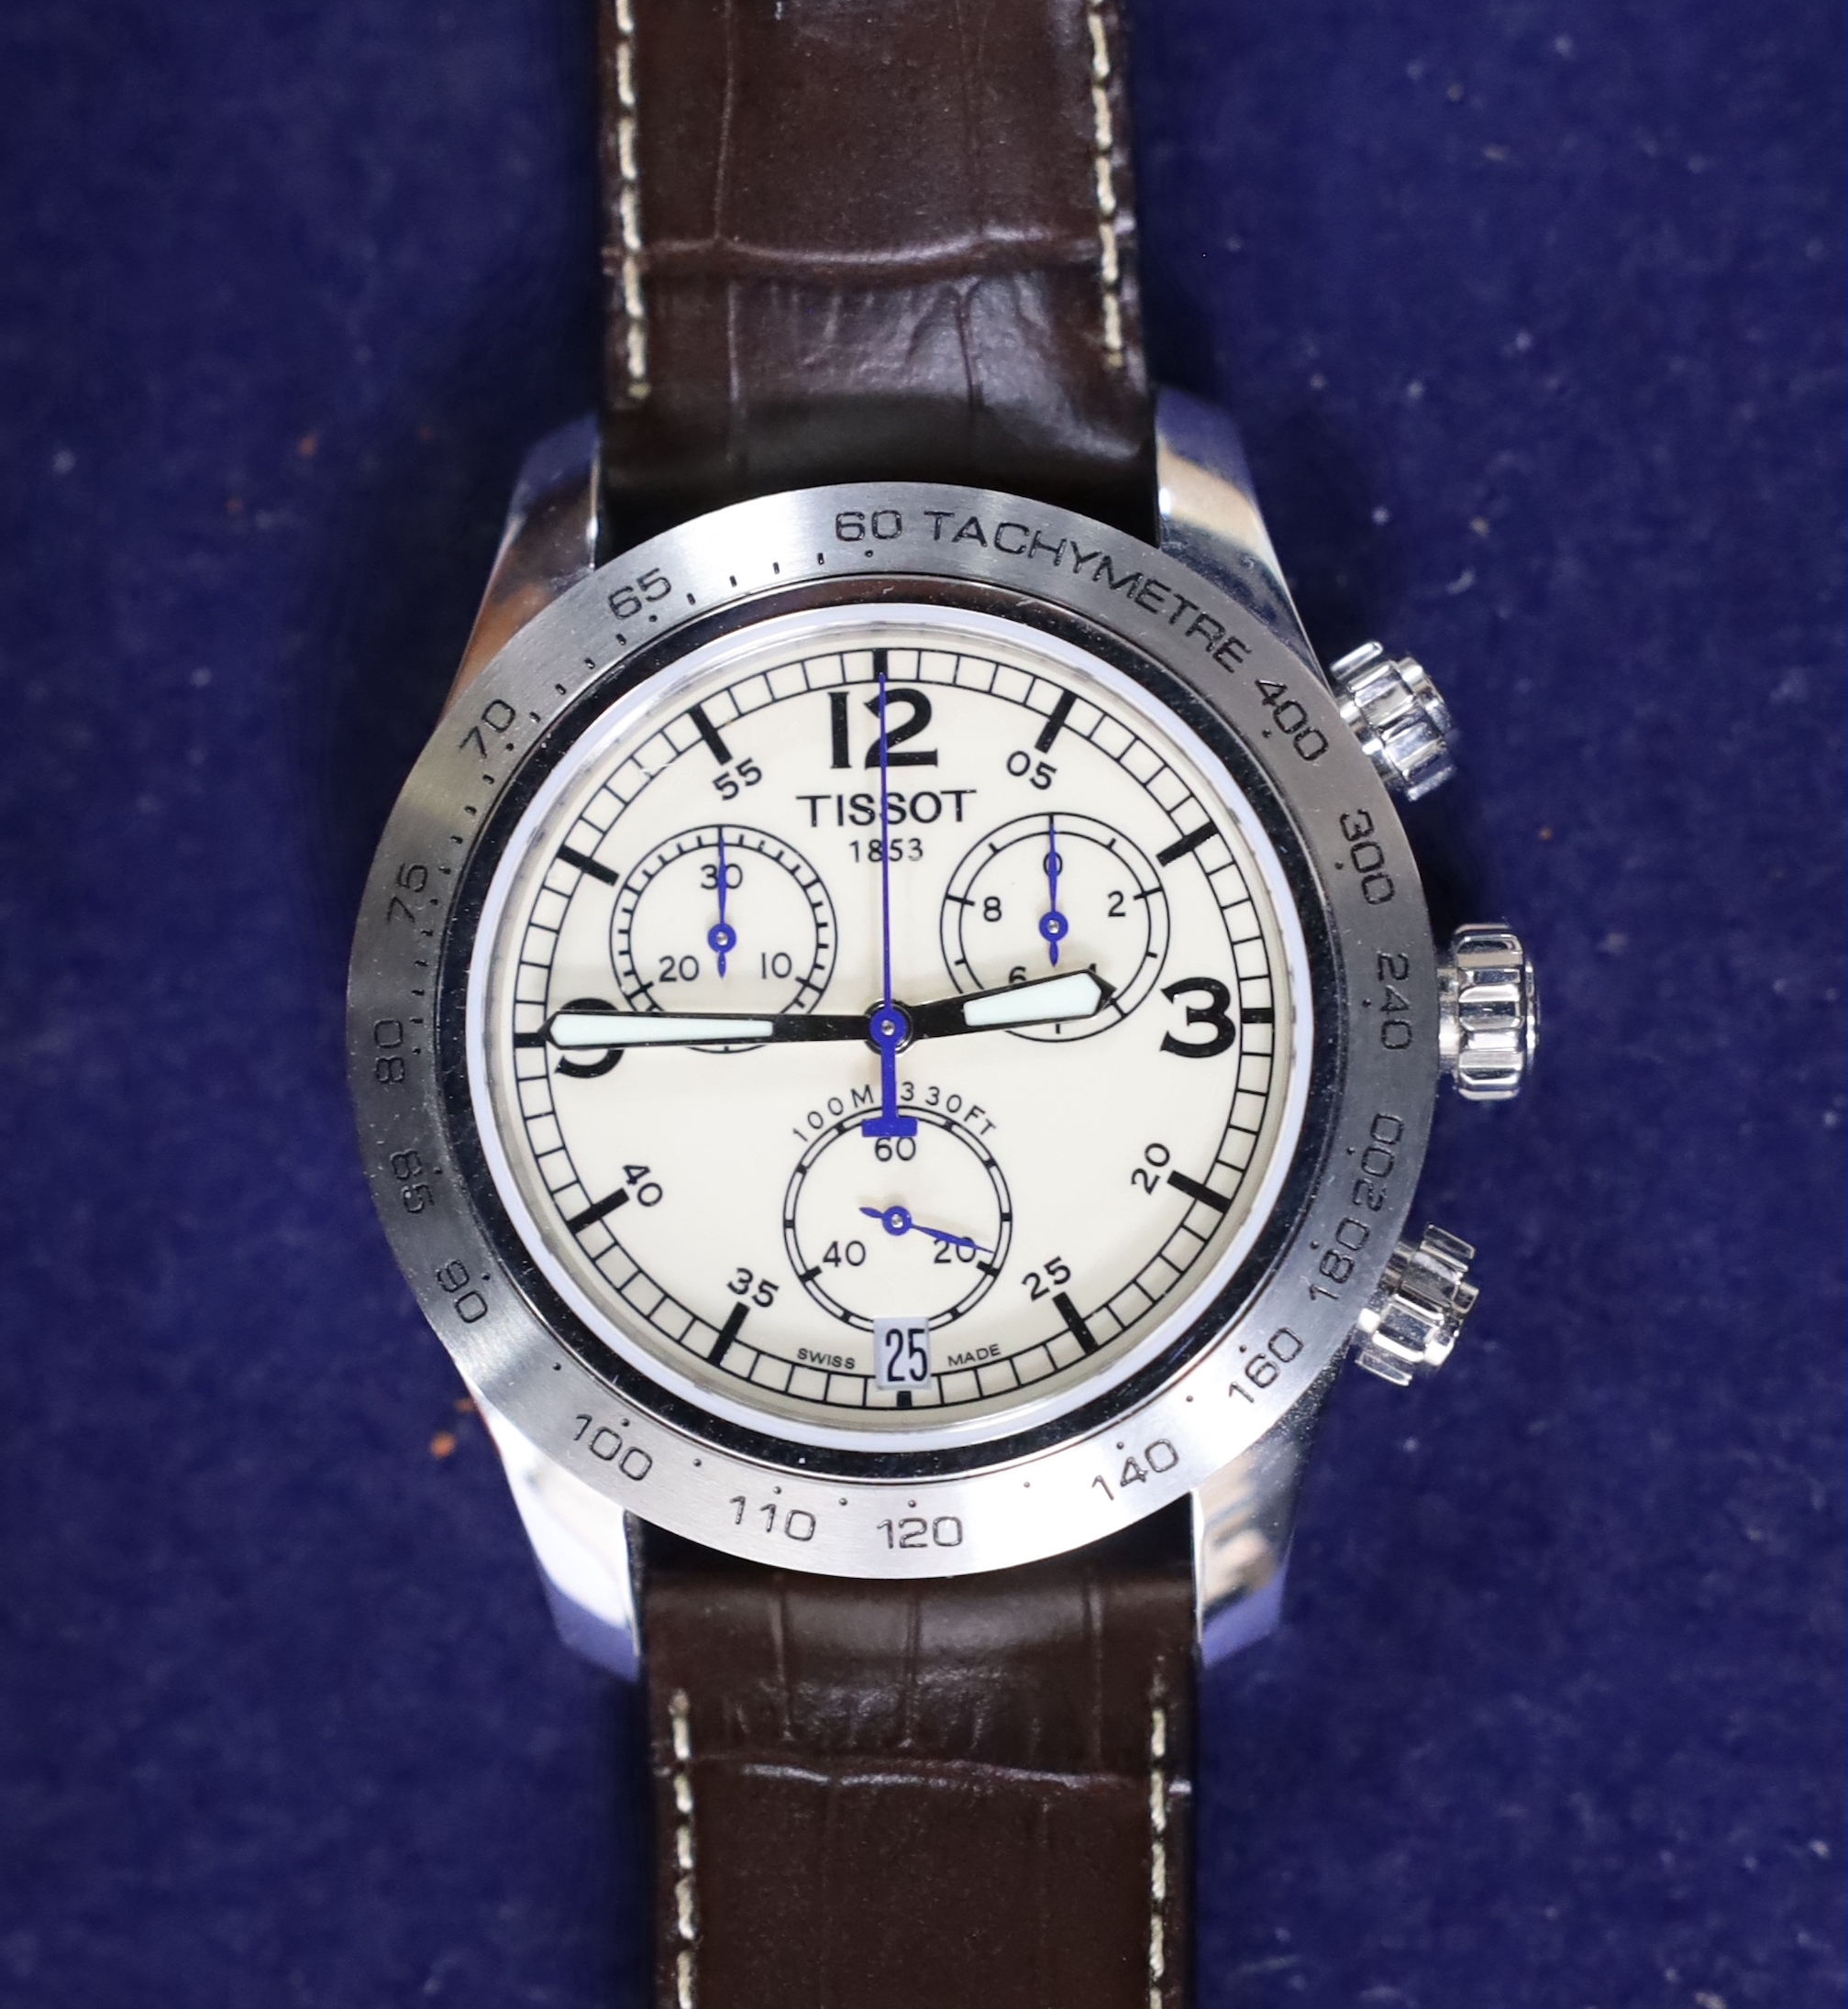 A gentleman's modern Tissot 1853 chronograph quartz wrist watch, on a Tissot leather strap, with Tissot buckle, no box or papers.